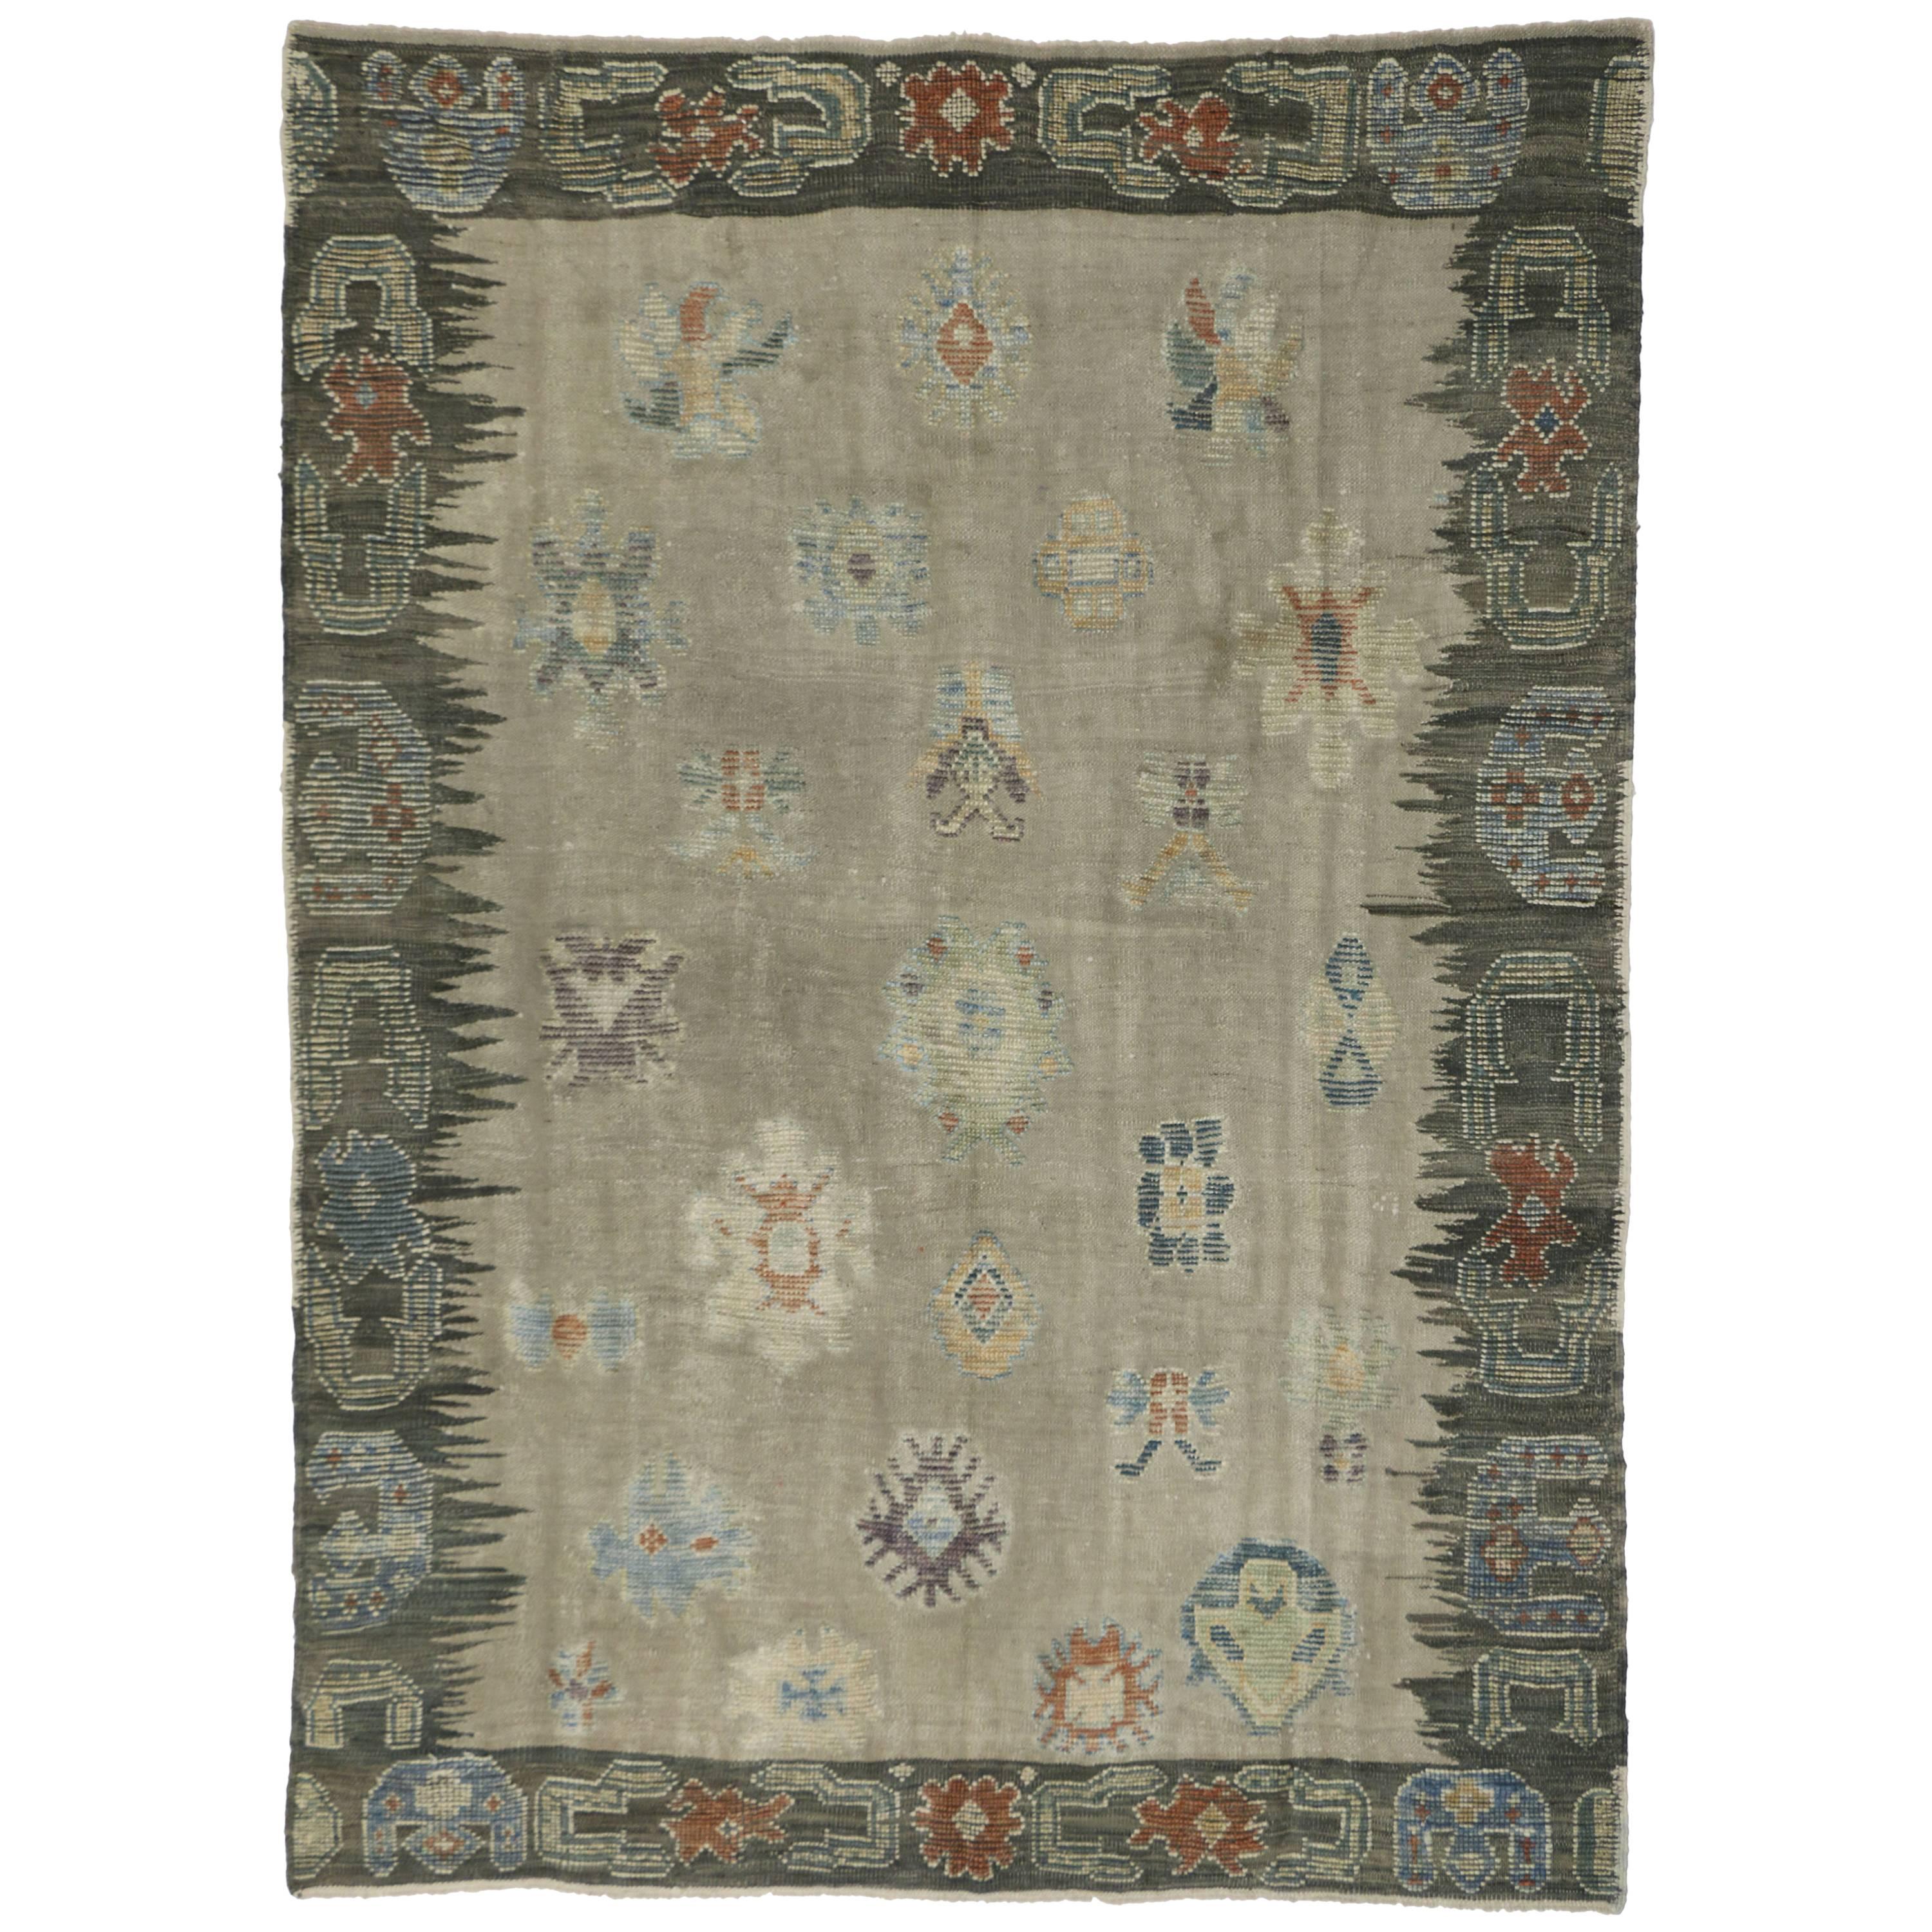 New Turkish Kilim Souf Rug with Tribal Style, Flat-weave Gray Souf Rug 